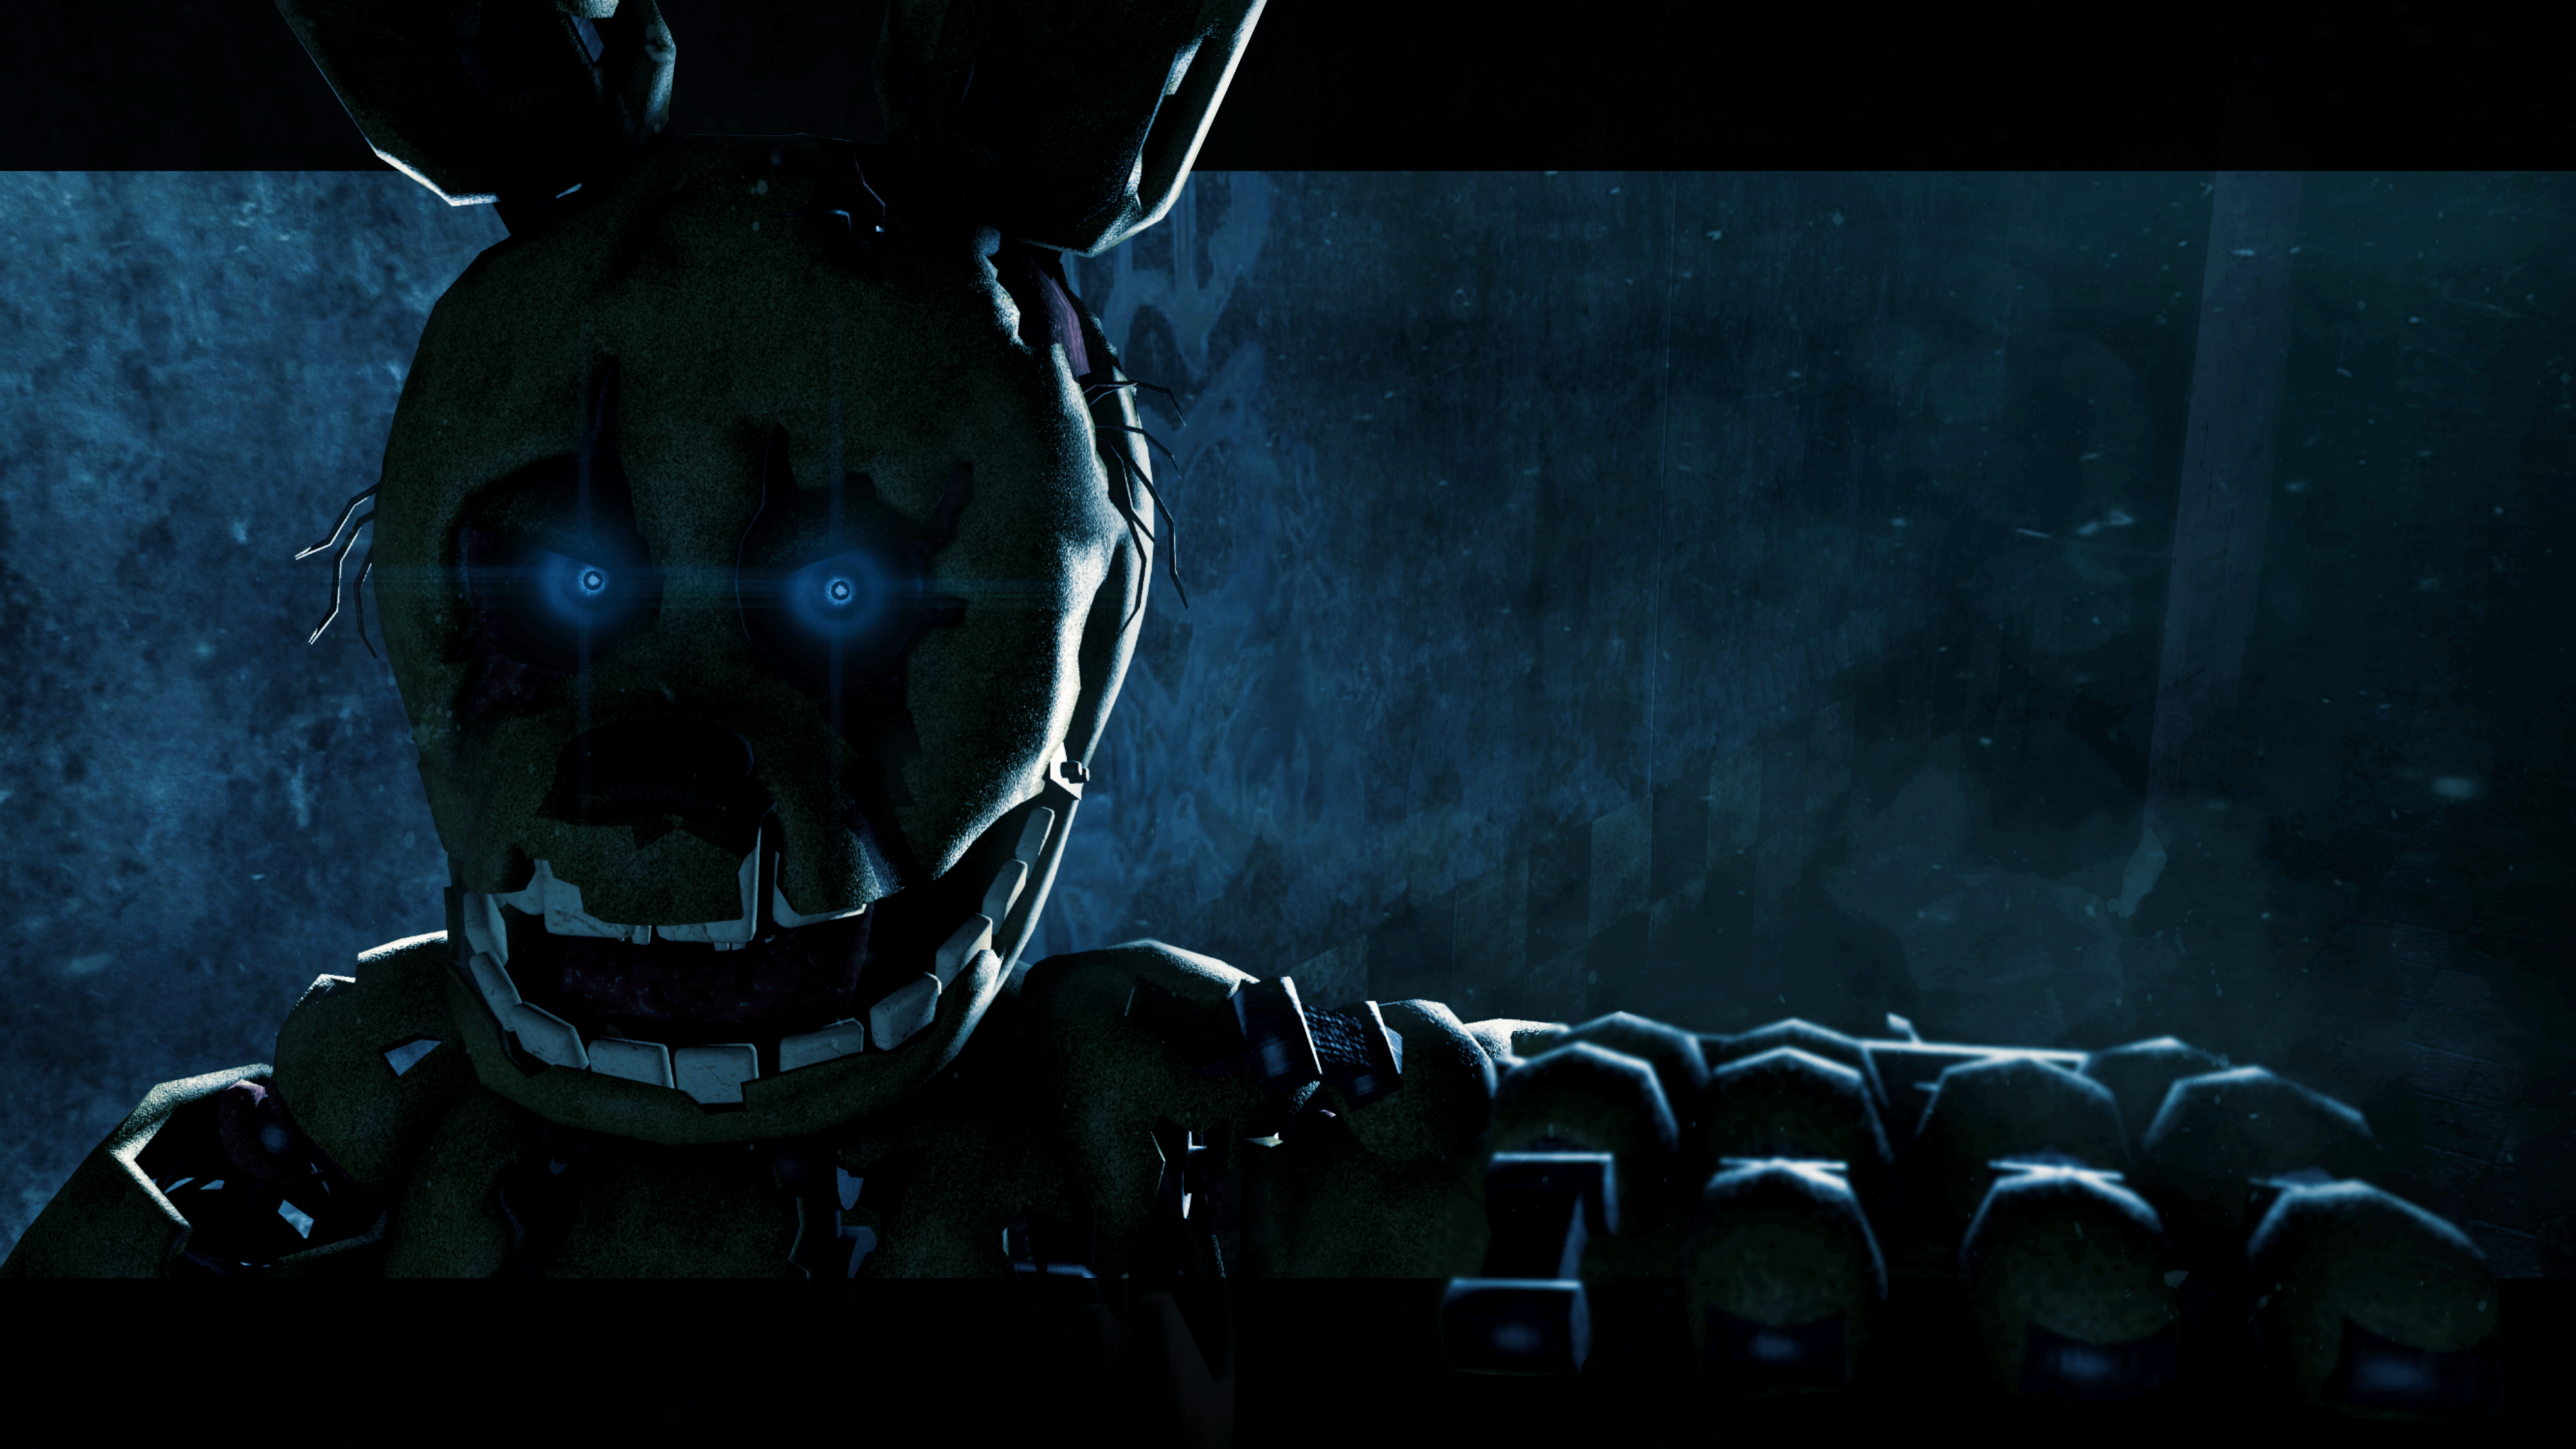 Download Spooky Springtrap from Five Nights at Freddys lurking in  darkness Wallpaper  Wallpaperscom